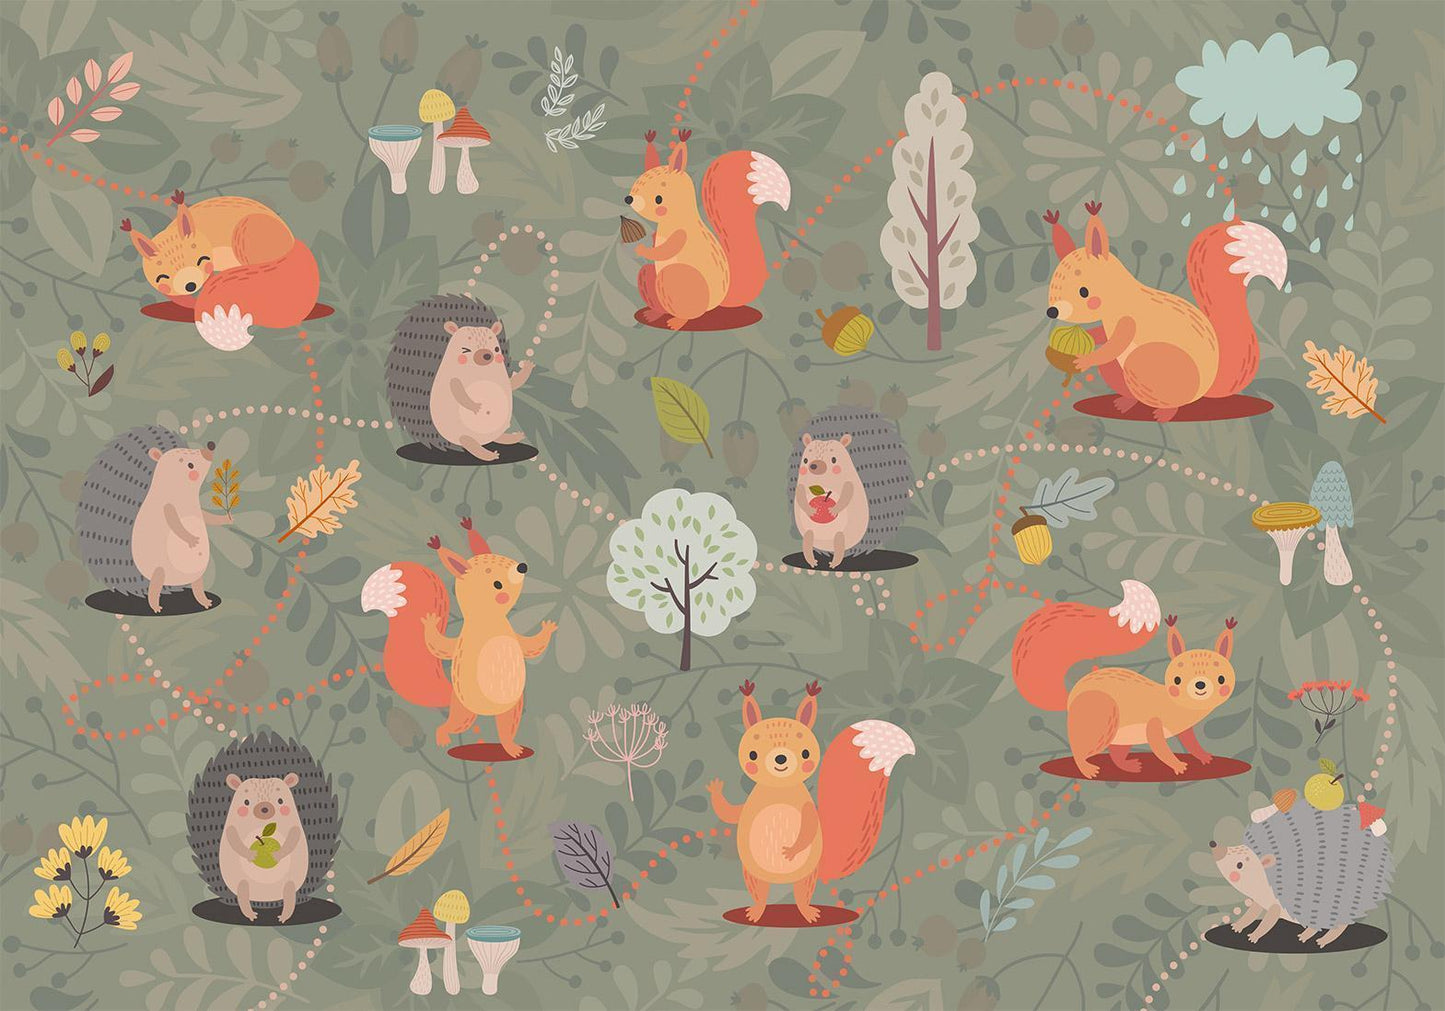 Photo wallpaper - Friends from the forest - colorful forest with mushrooms and animals for children